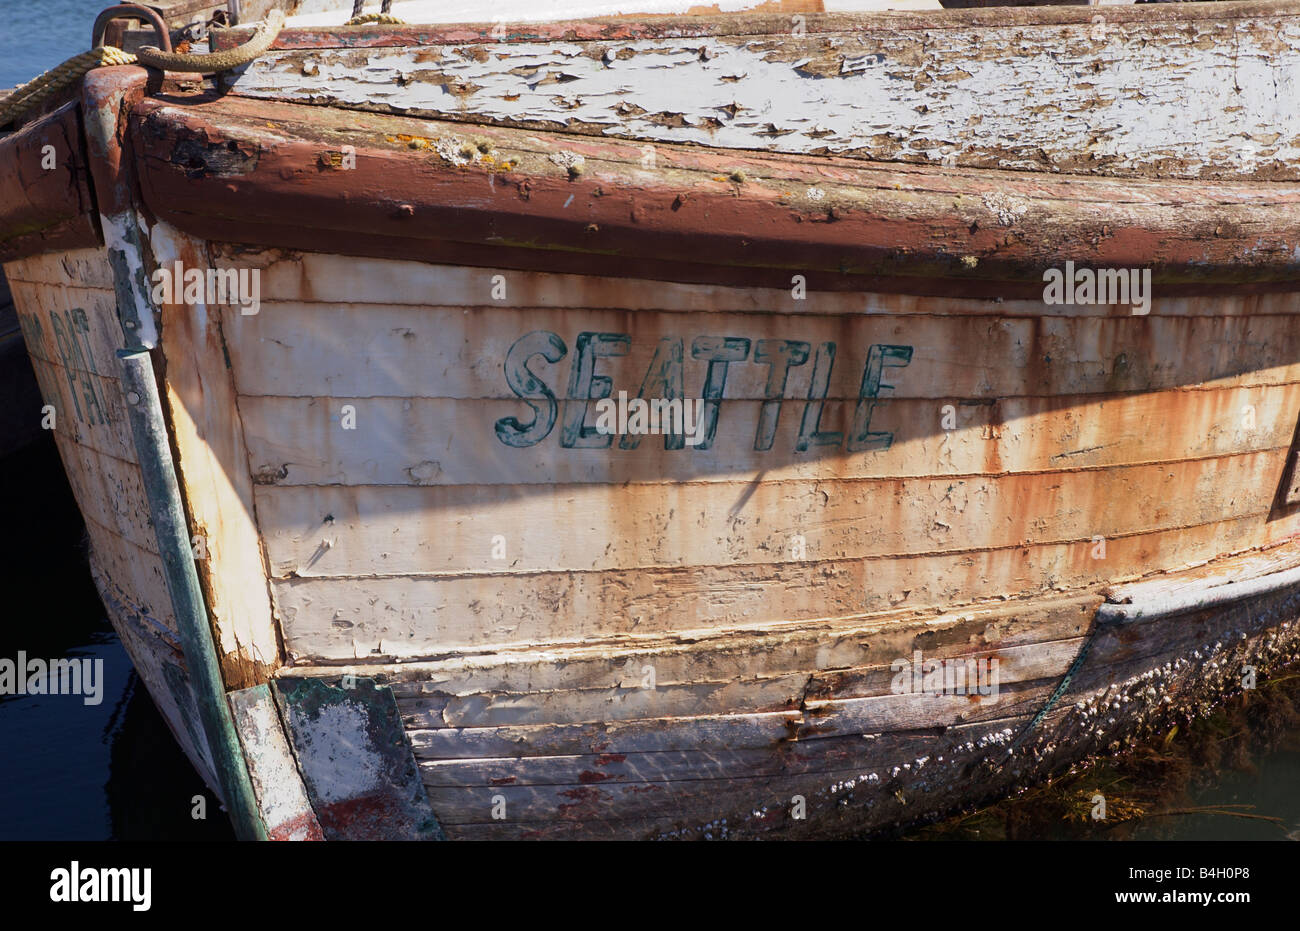 The Bow of an Old Dilapidated Fishing Boat Westport Washington Stock Photo